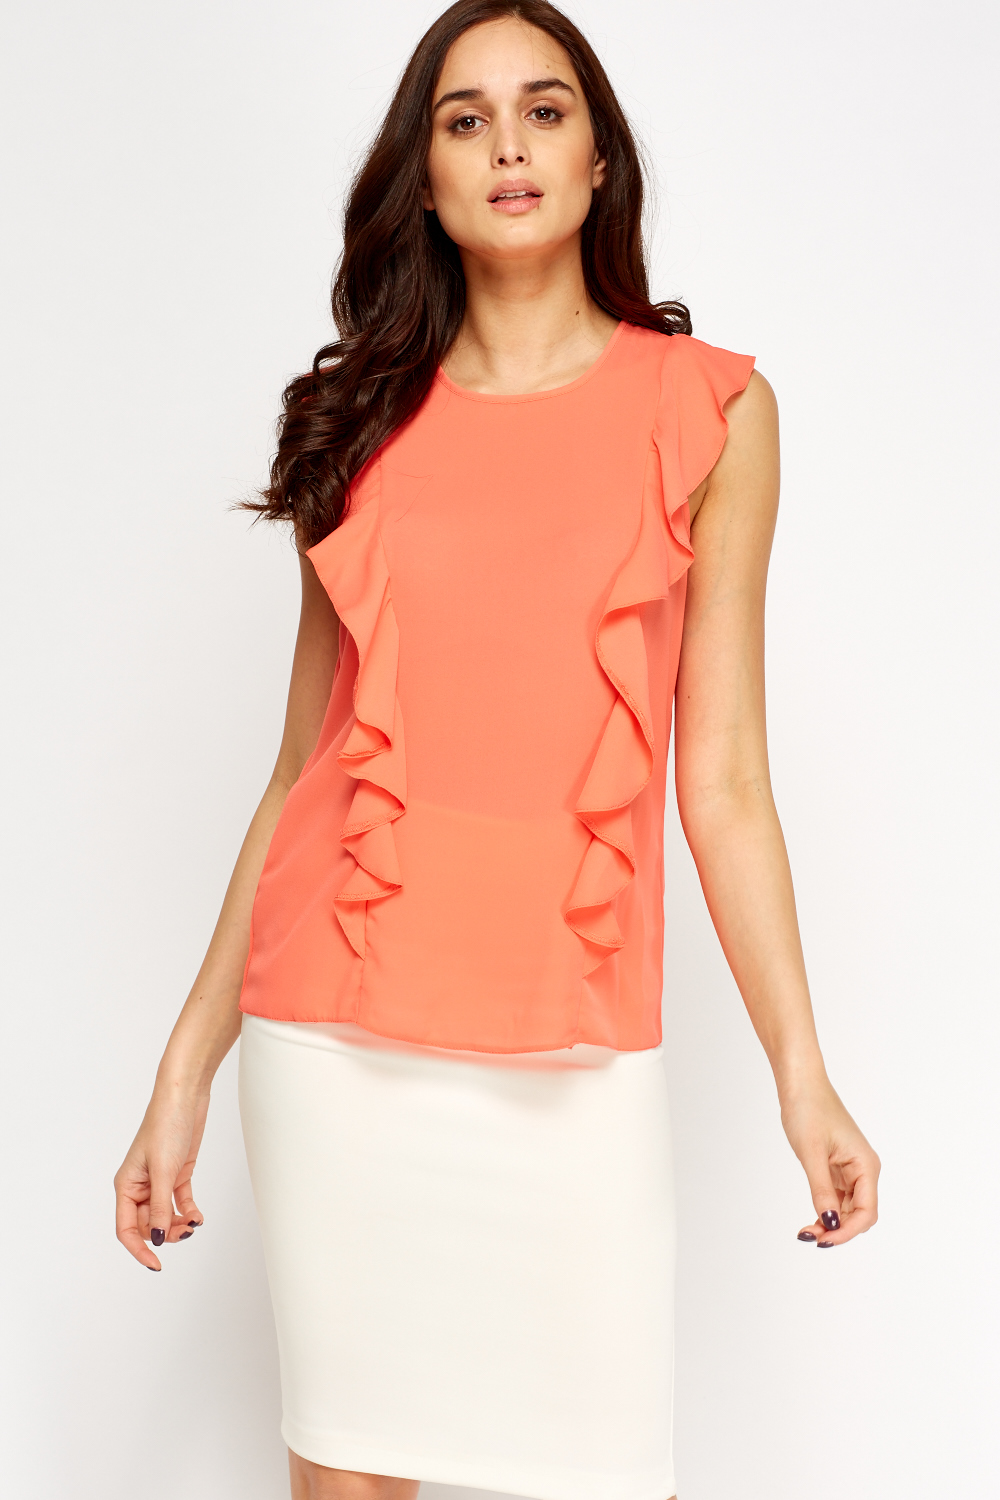 ladies tops and blouses coral blush dresses